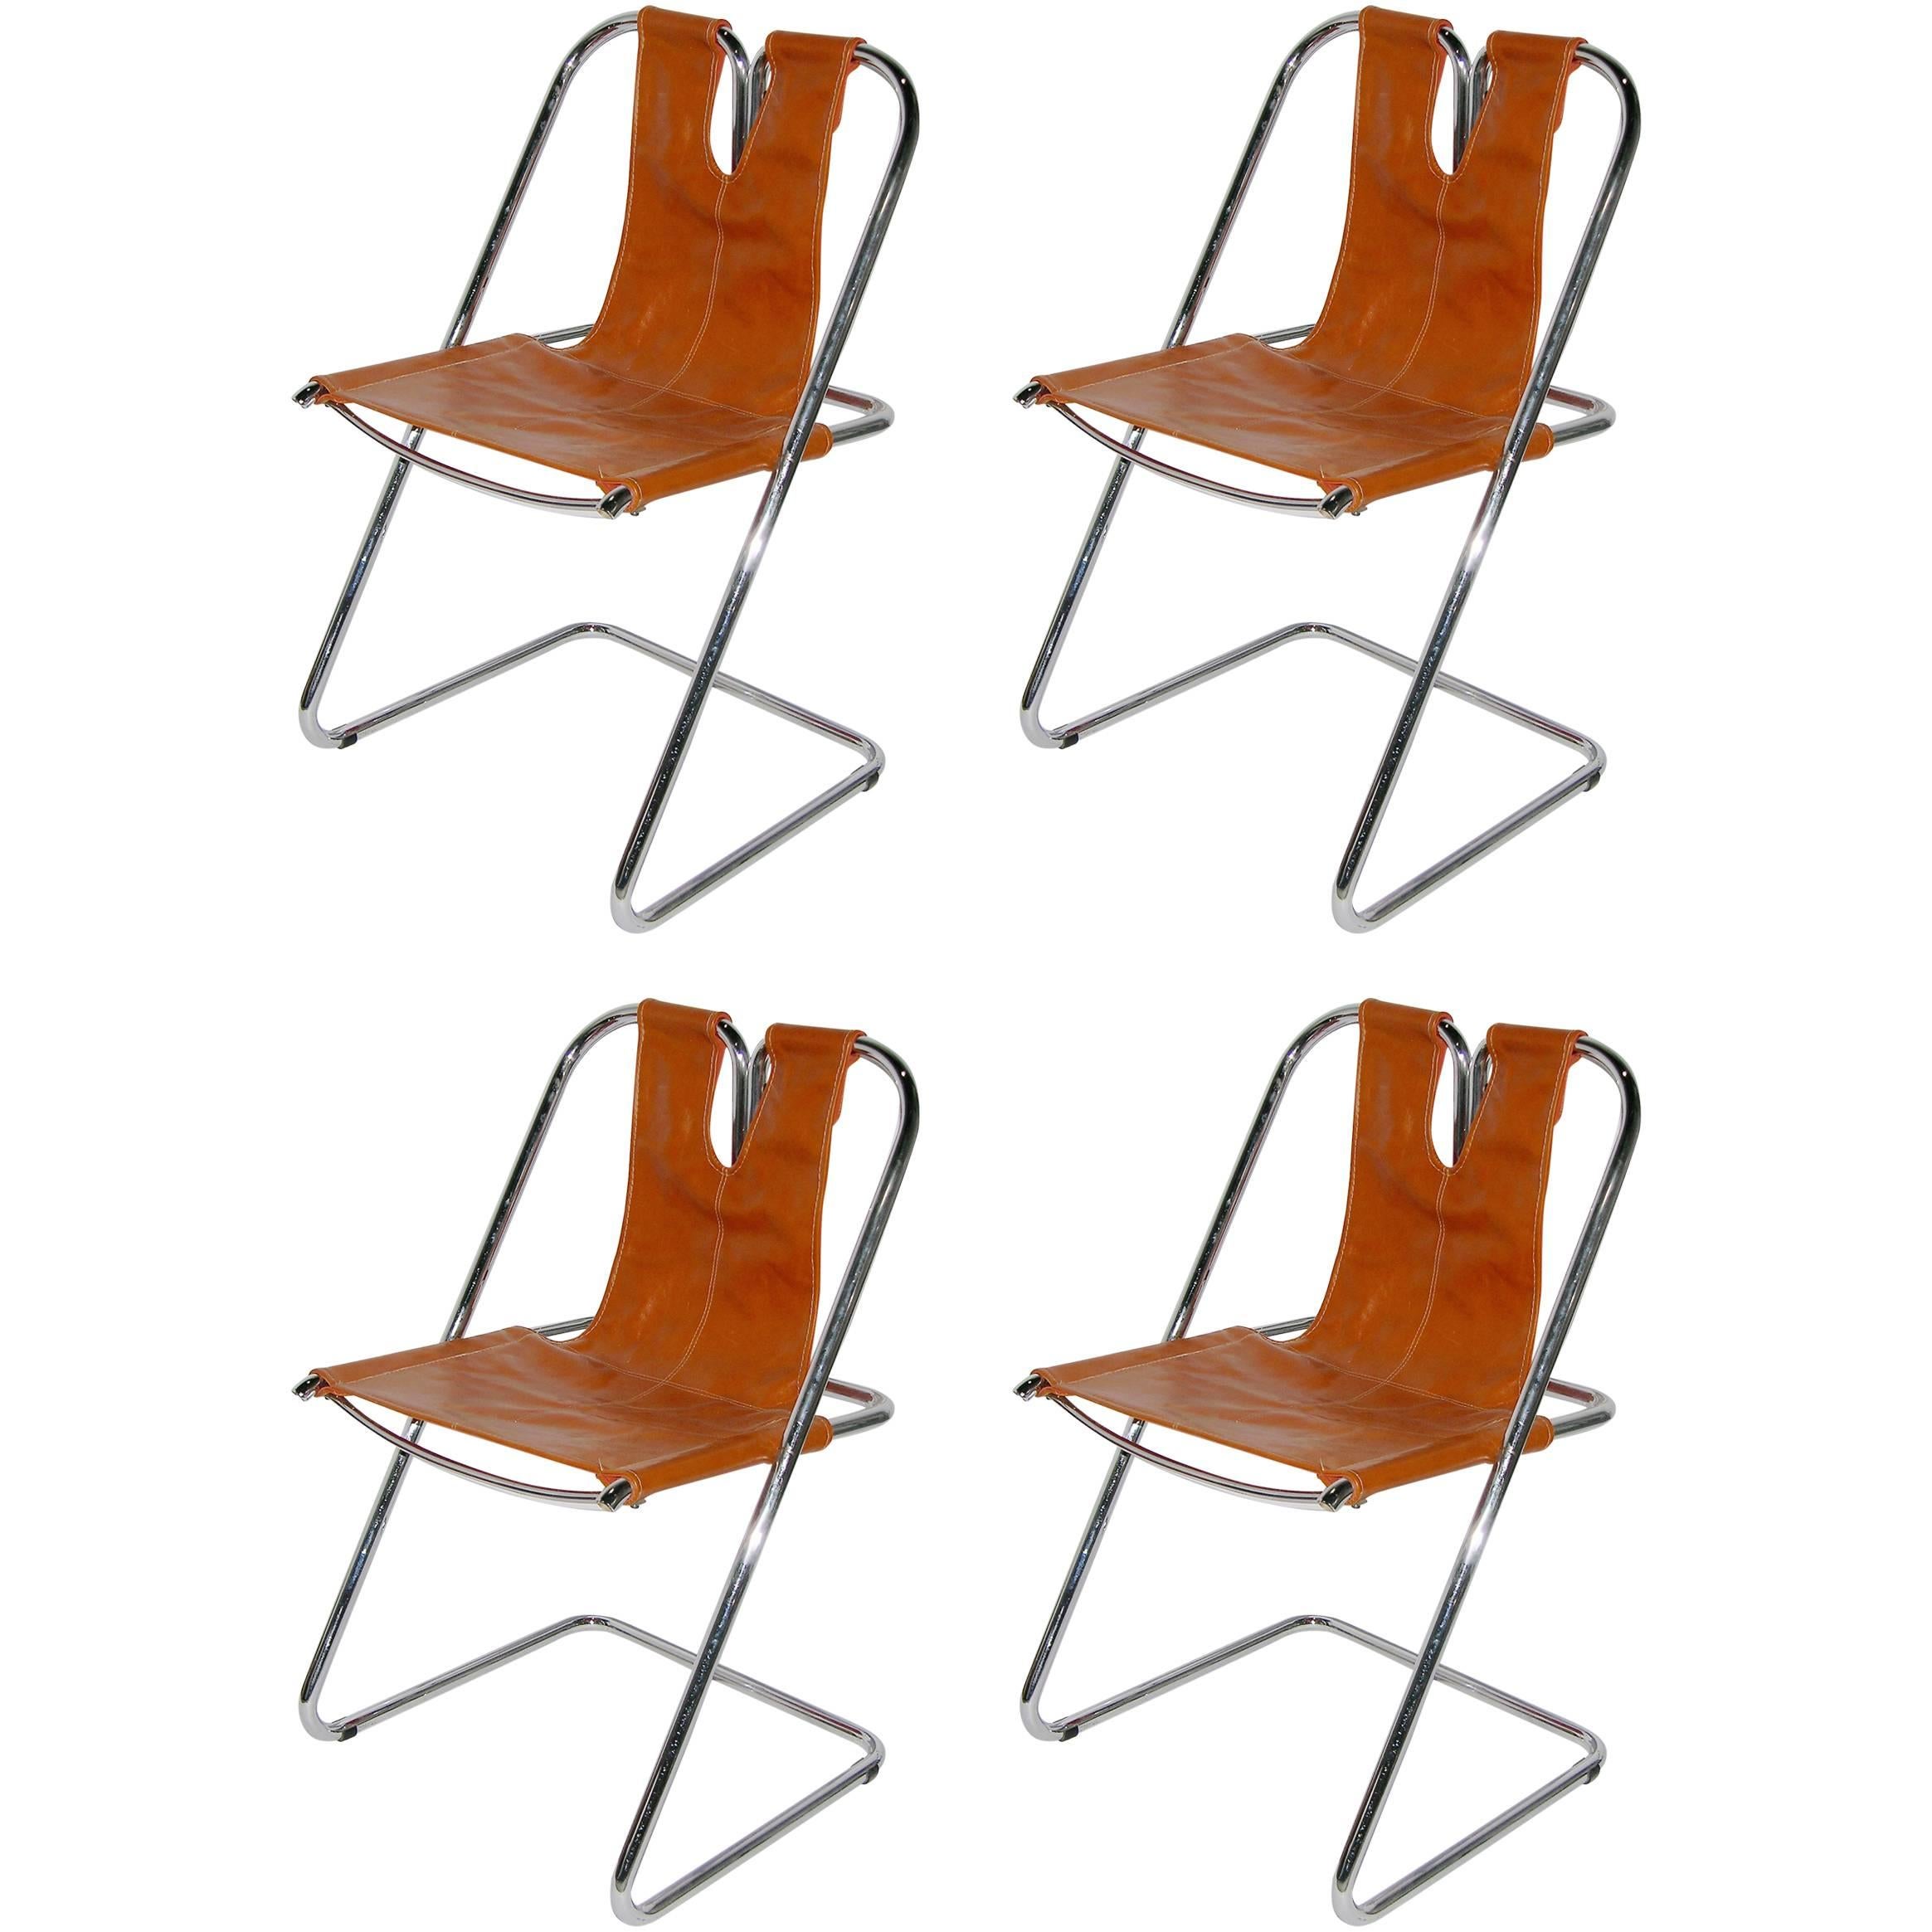 1960s Italian Set of Four Hand-Stitched Leather and Chrome Chairs For Sale